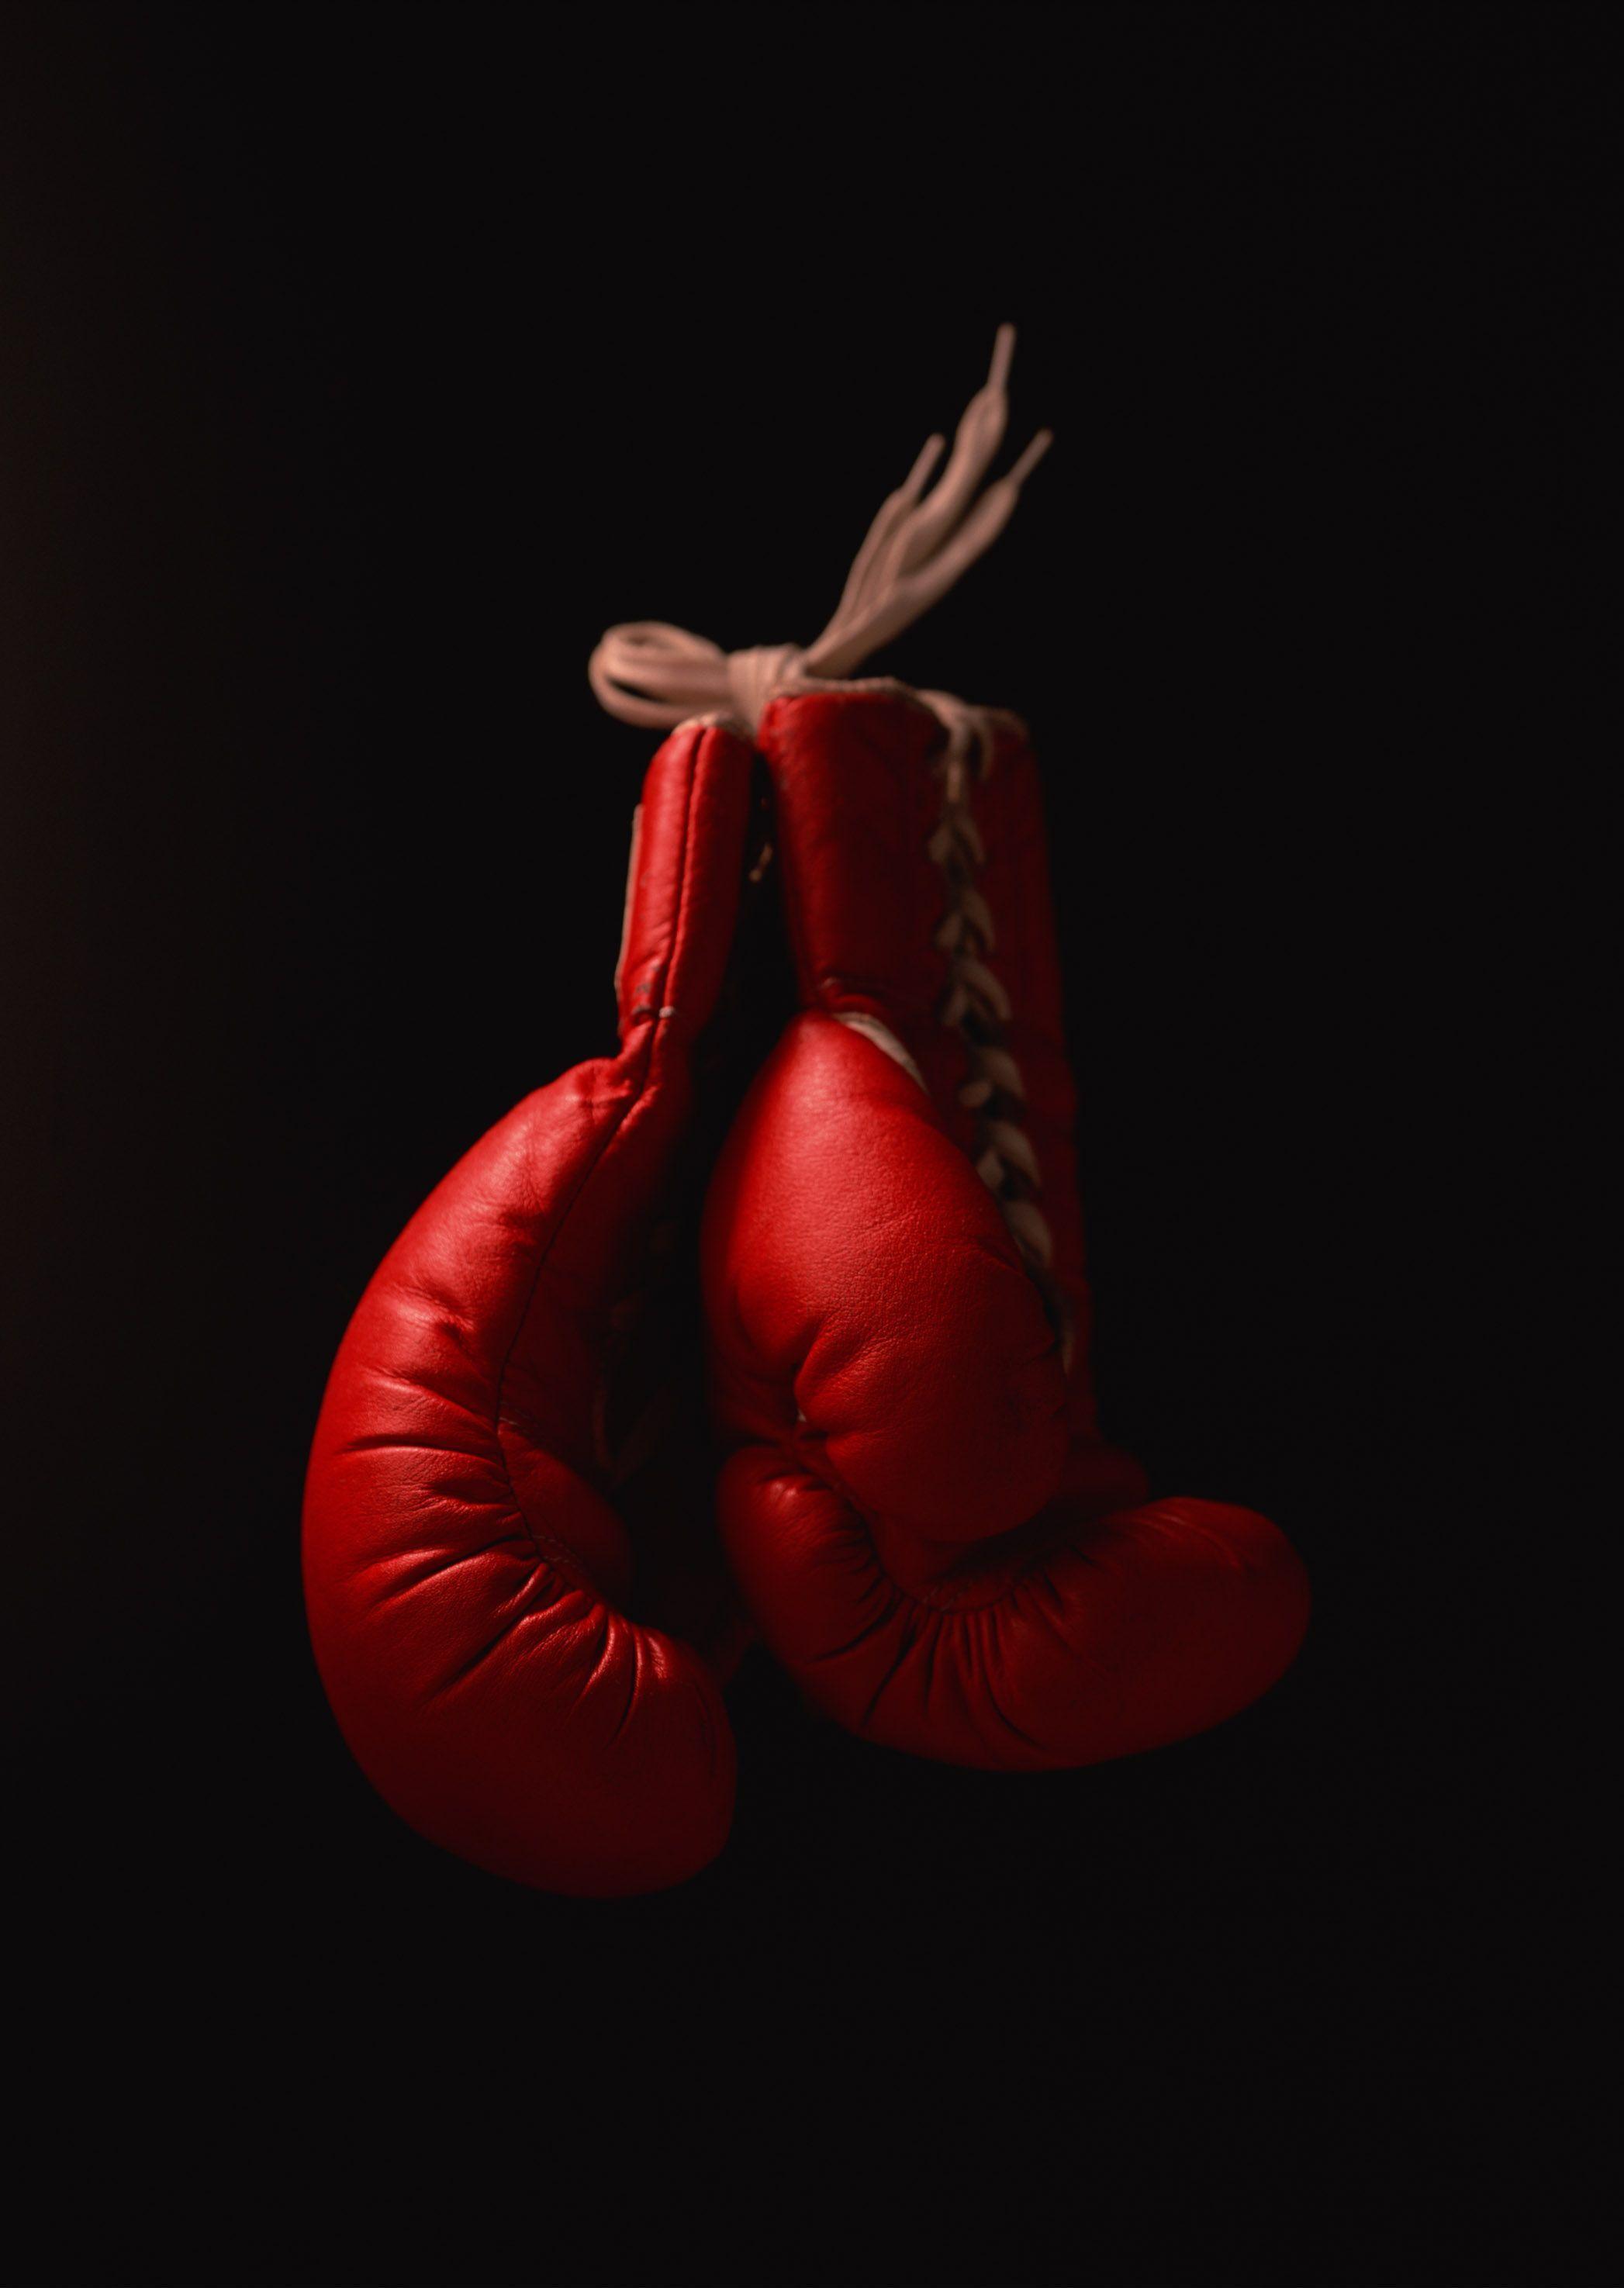 Gloves Videos Boxing Gloves Picture Boxing Gloves